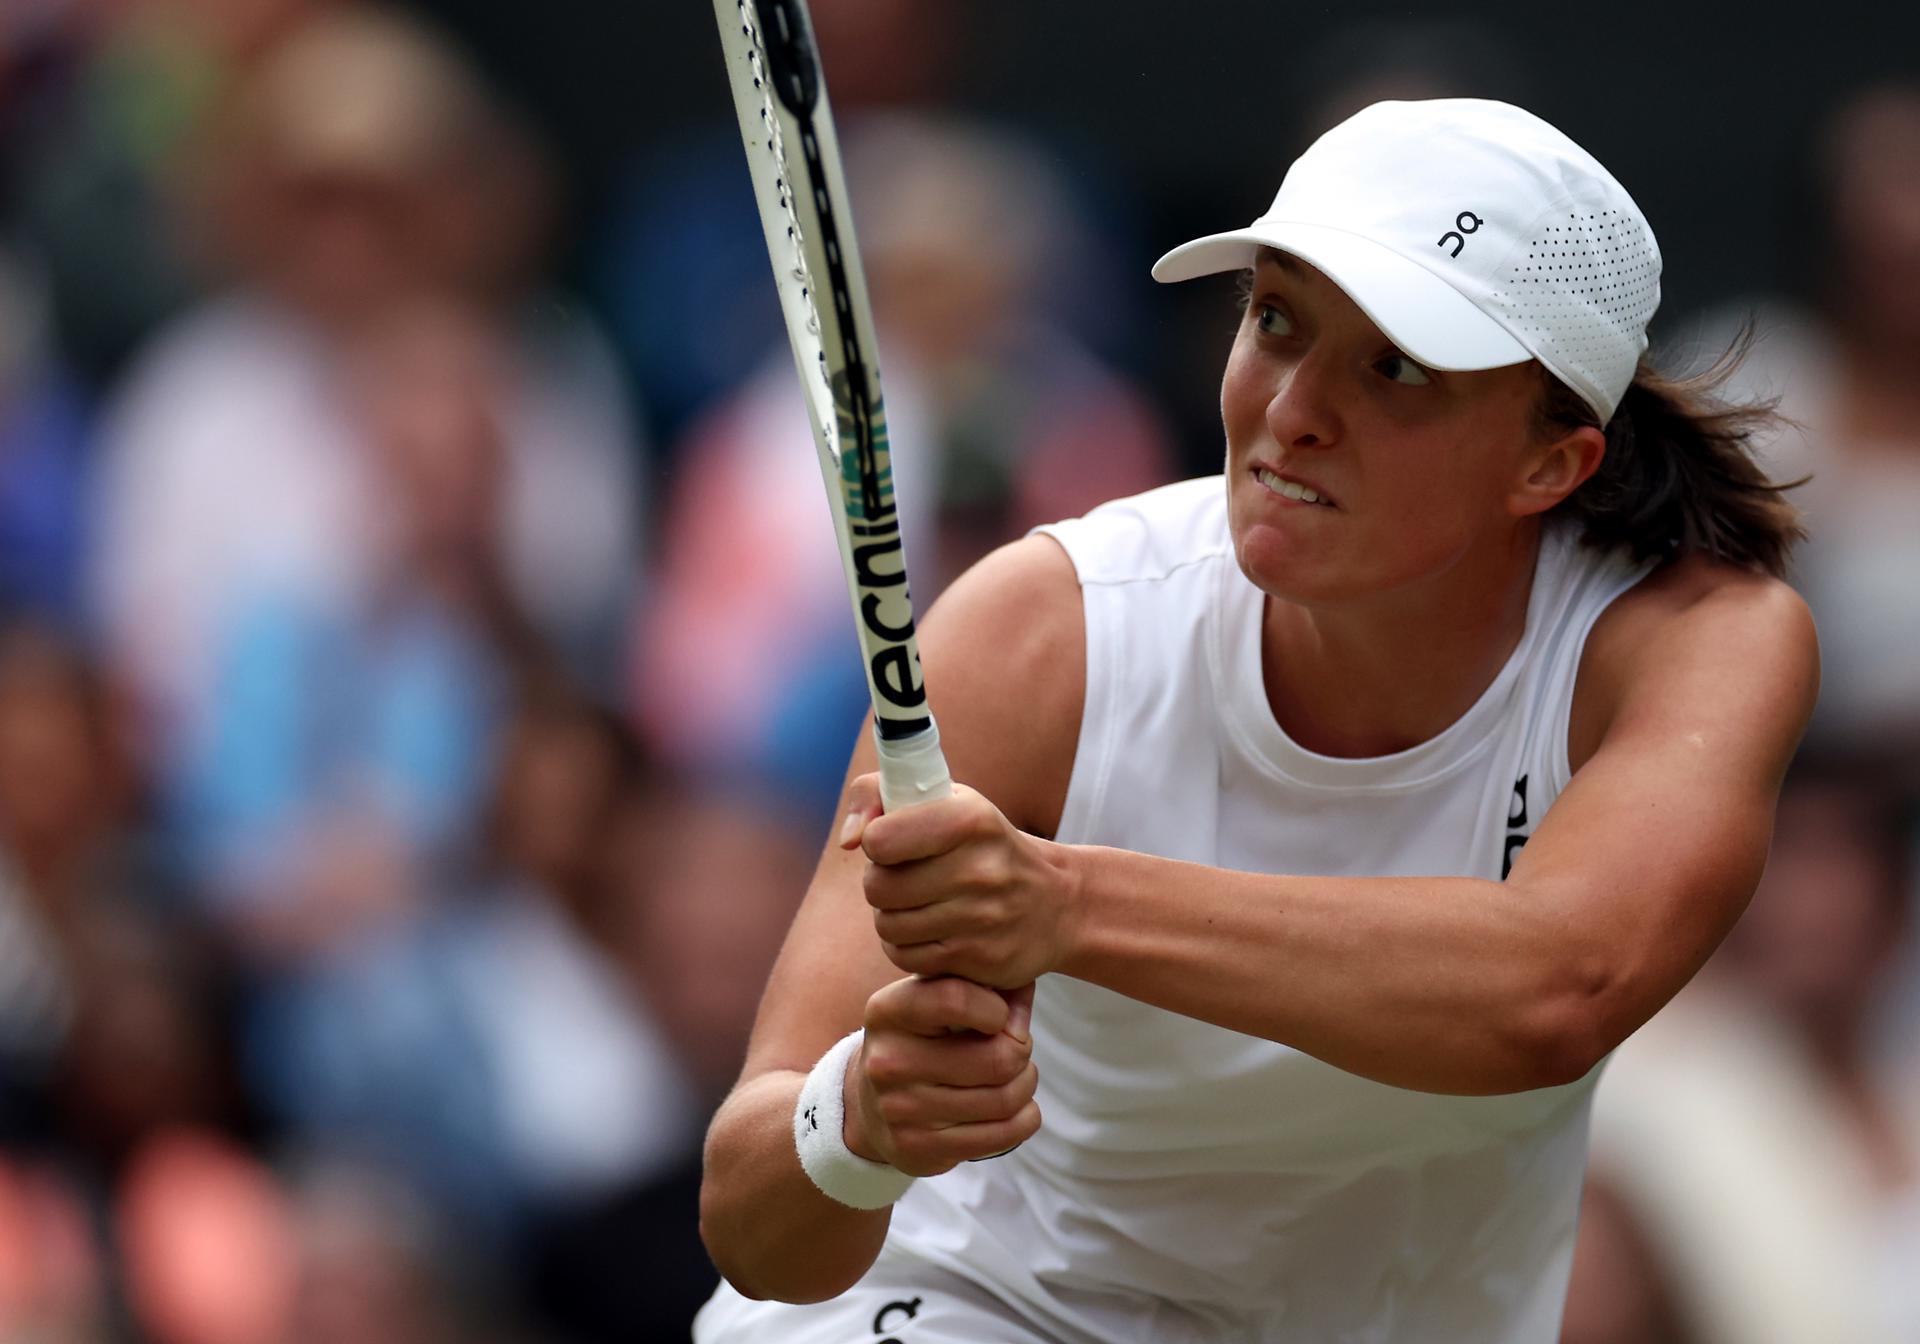 Iga Swiatek in action against Belinda Bencic in the 4th round of the Wimbledon Championships in London on 9 July 2023. EFE/EPA/ISABEL INFANTES/EDITORIAL USE ONLY